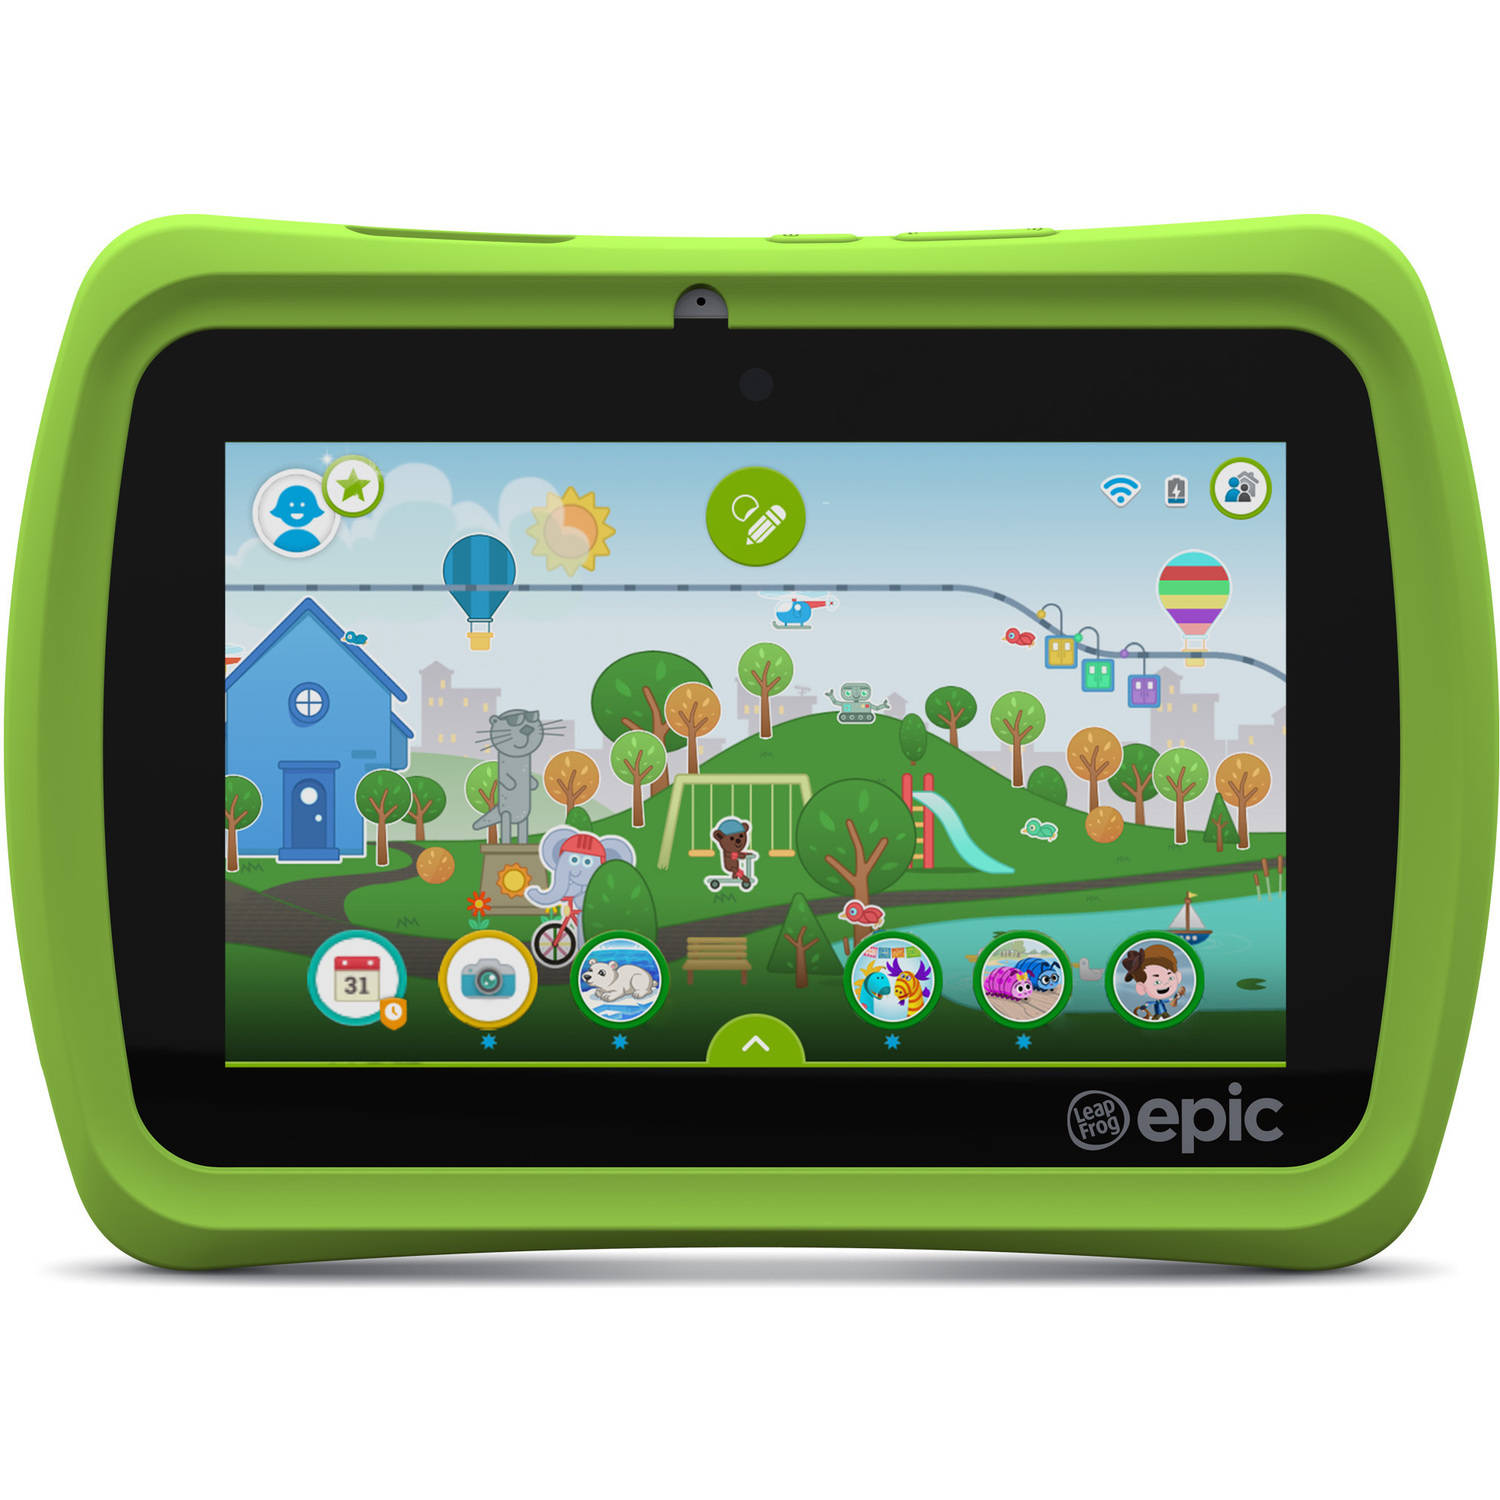 LeapFrog Epic 7" Android-based Kids Tablet 16GB - image 5 of 20